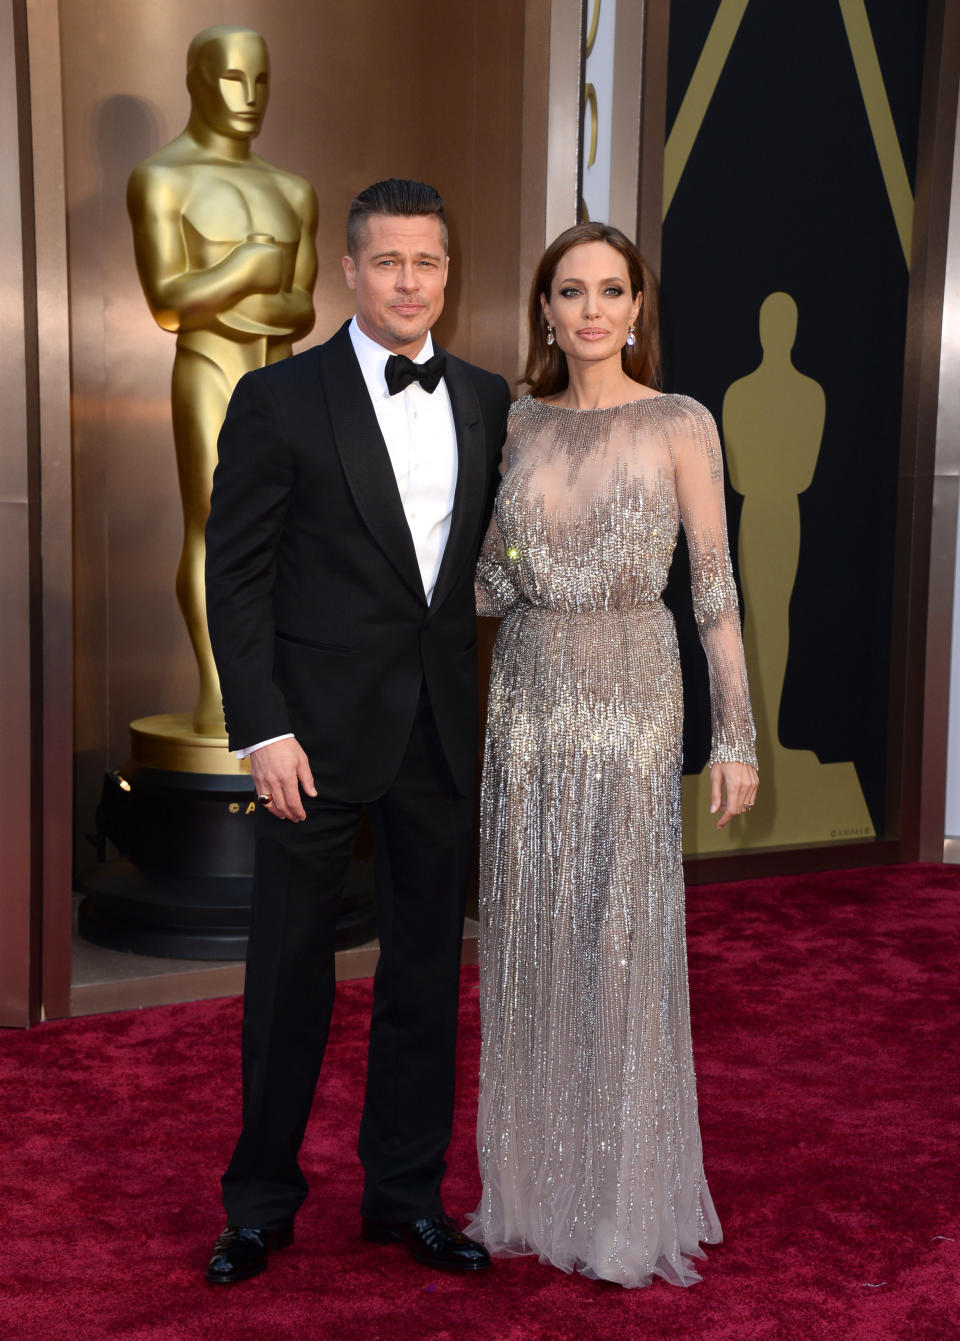 Brad Pitt, left, and Angelina Jolie arrive at the Oscars on Sunday, March 2, 2014, at the Dolby Theatre in Los Angeles. (Photo by Jordan Strauss/Invision/AP)